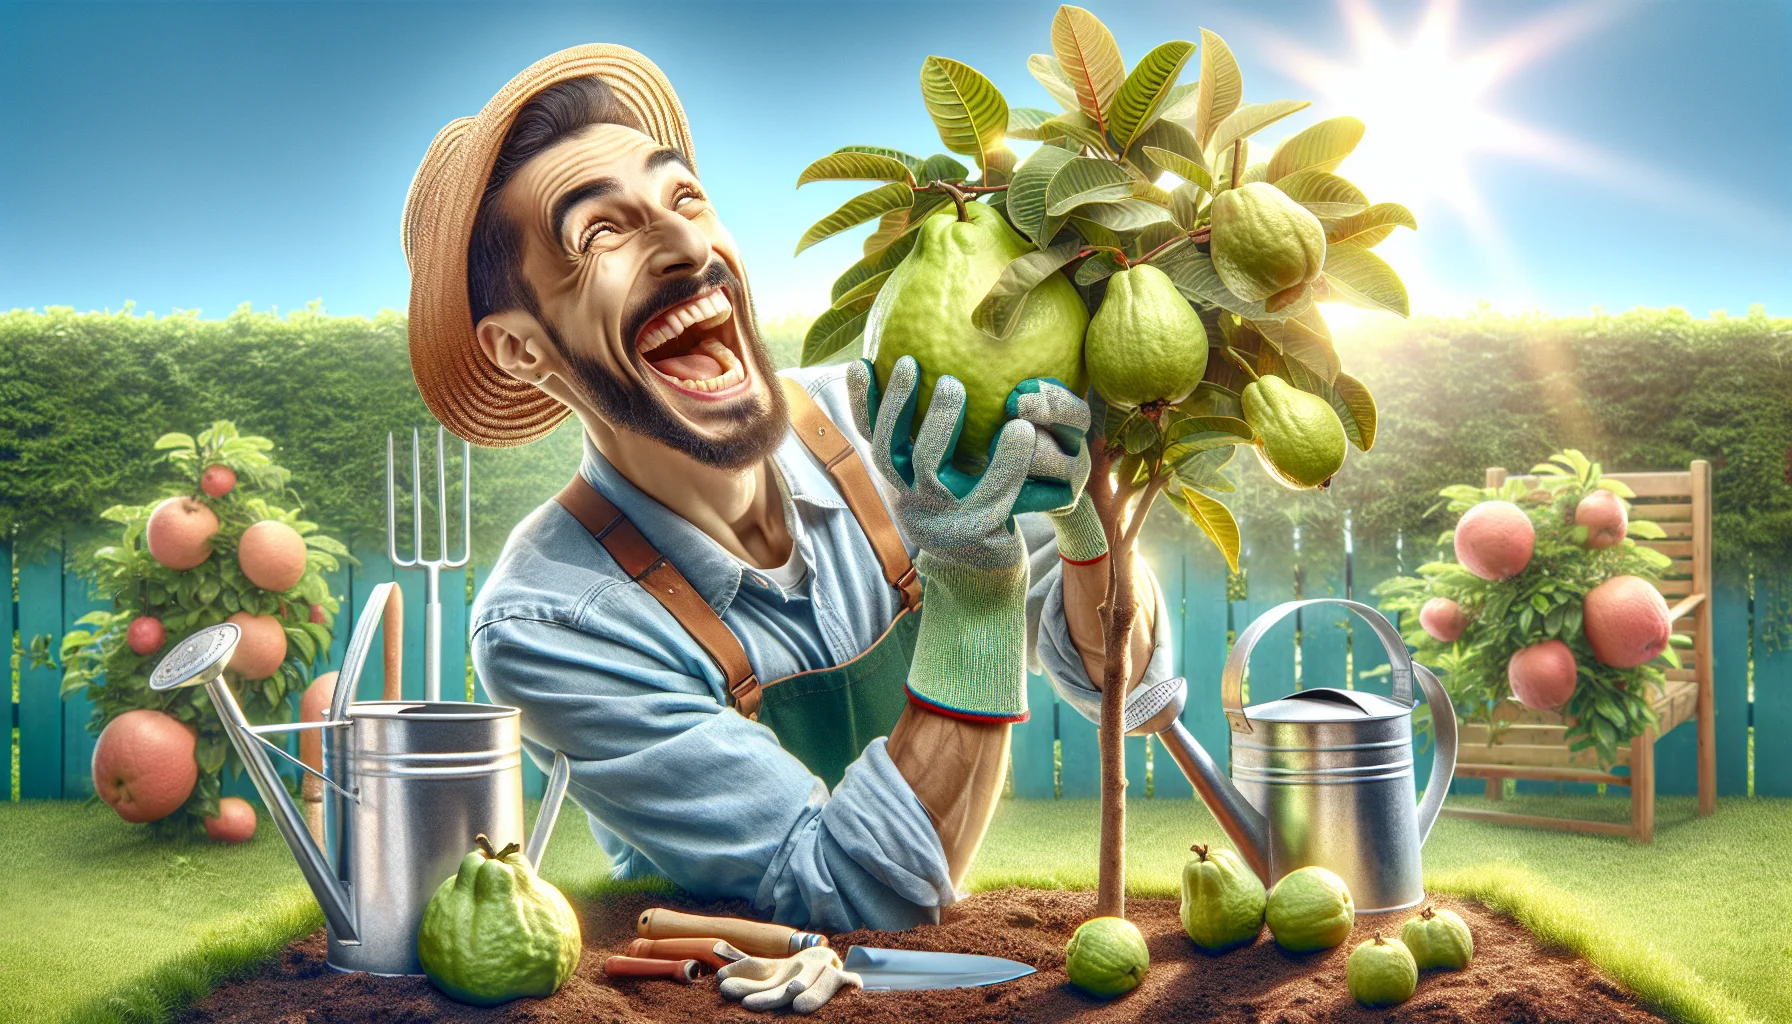 An amusing and realistic image portraying a person engaging in gardening and enjoying a guava. The person, a Middle-Eastern male, is seen laughing as he playfully tries to bite into the fresh, juicy guava. Nearby is a flourishing guava tree with luscious fruits hanging on its branches. The bright sun is shining in the clear sky, casting a warm light on the scene. The backdrop includes a well-kept garden with other fruits and vegetables, thereby encouraging the joy of gardening. Accessories like a watering can, garden gloves, and a straw hat add charm to the setting.